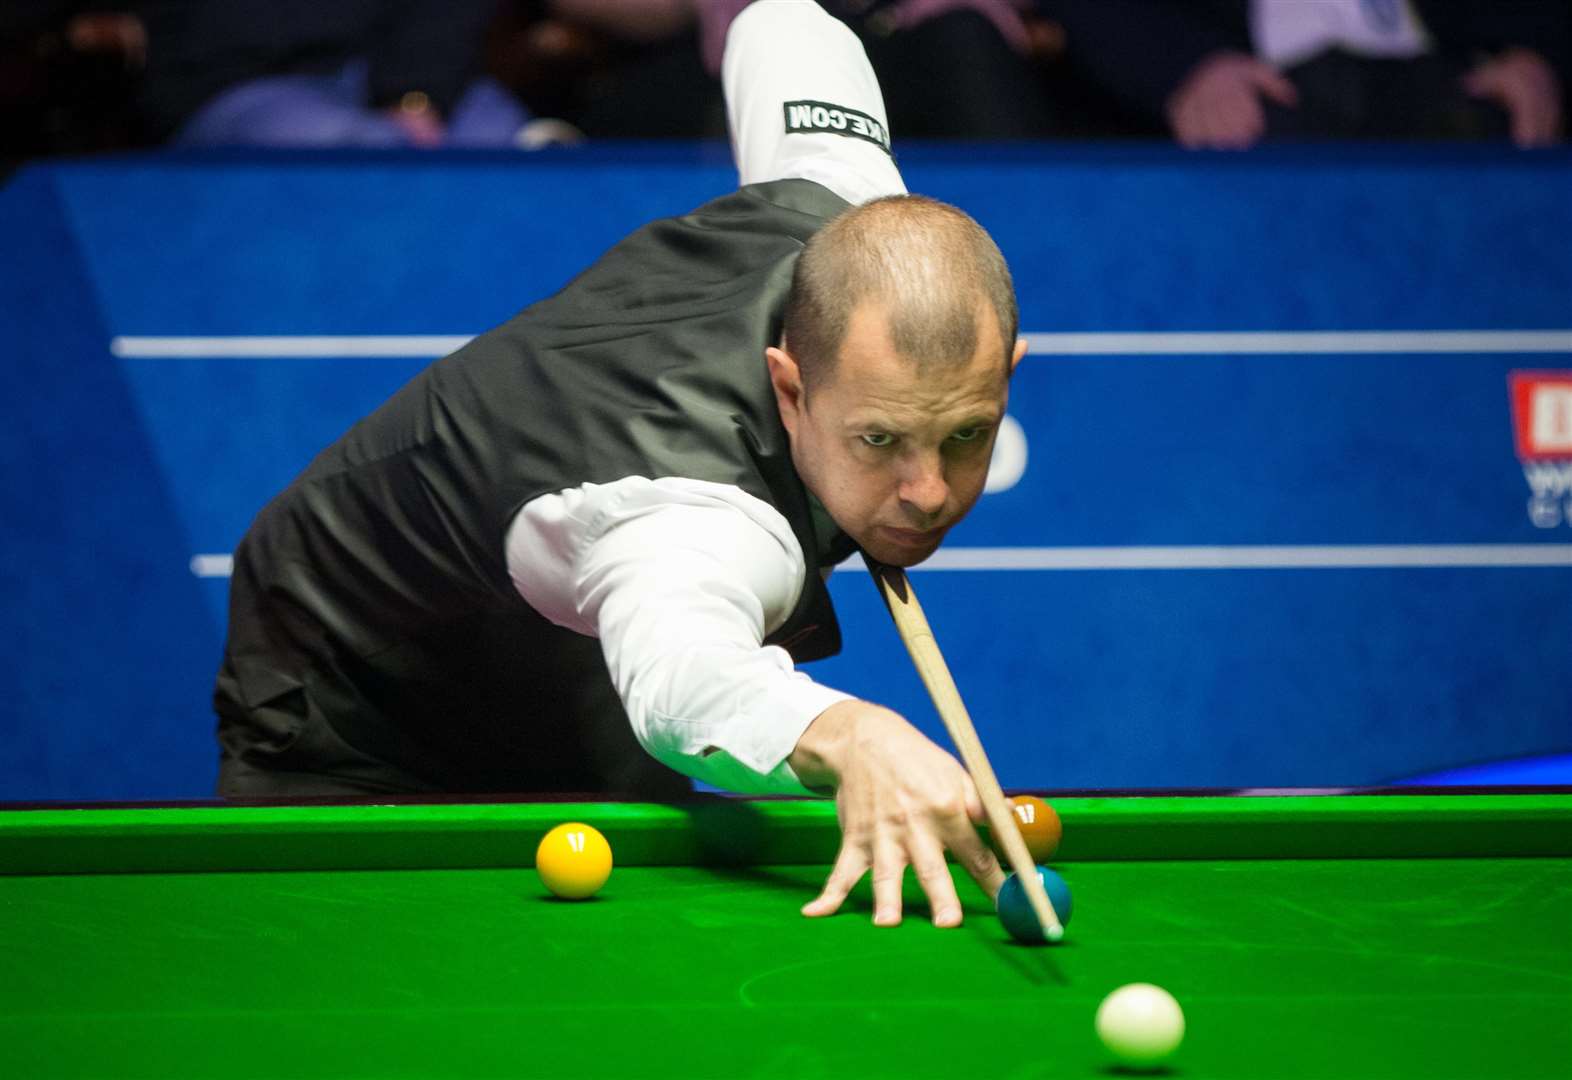 Barry Hawkins takes part in the behind-closed-doors Championship League snooker tournament which starts on June 1 at the Marshall Arena in Milton Keynes, getting underway when Judd Trump plays David Grace